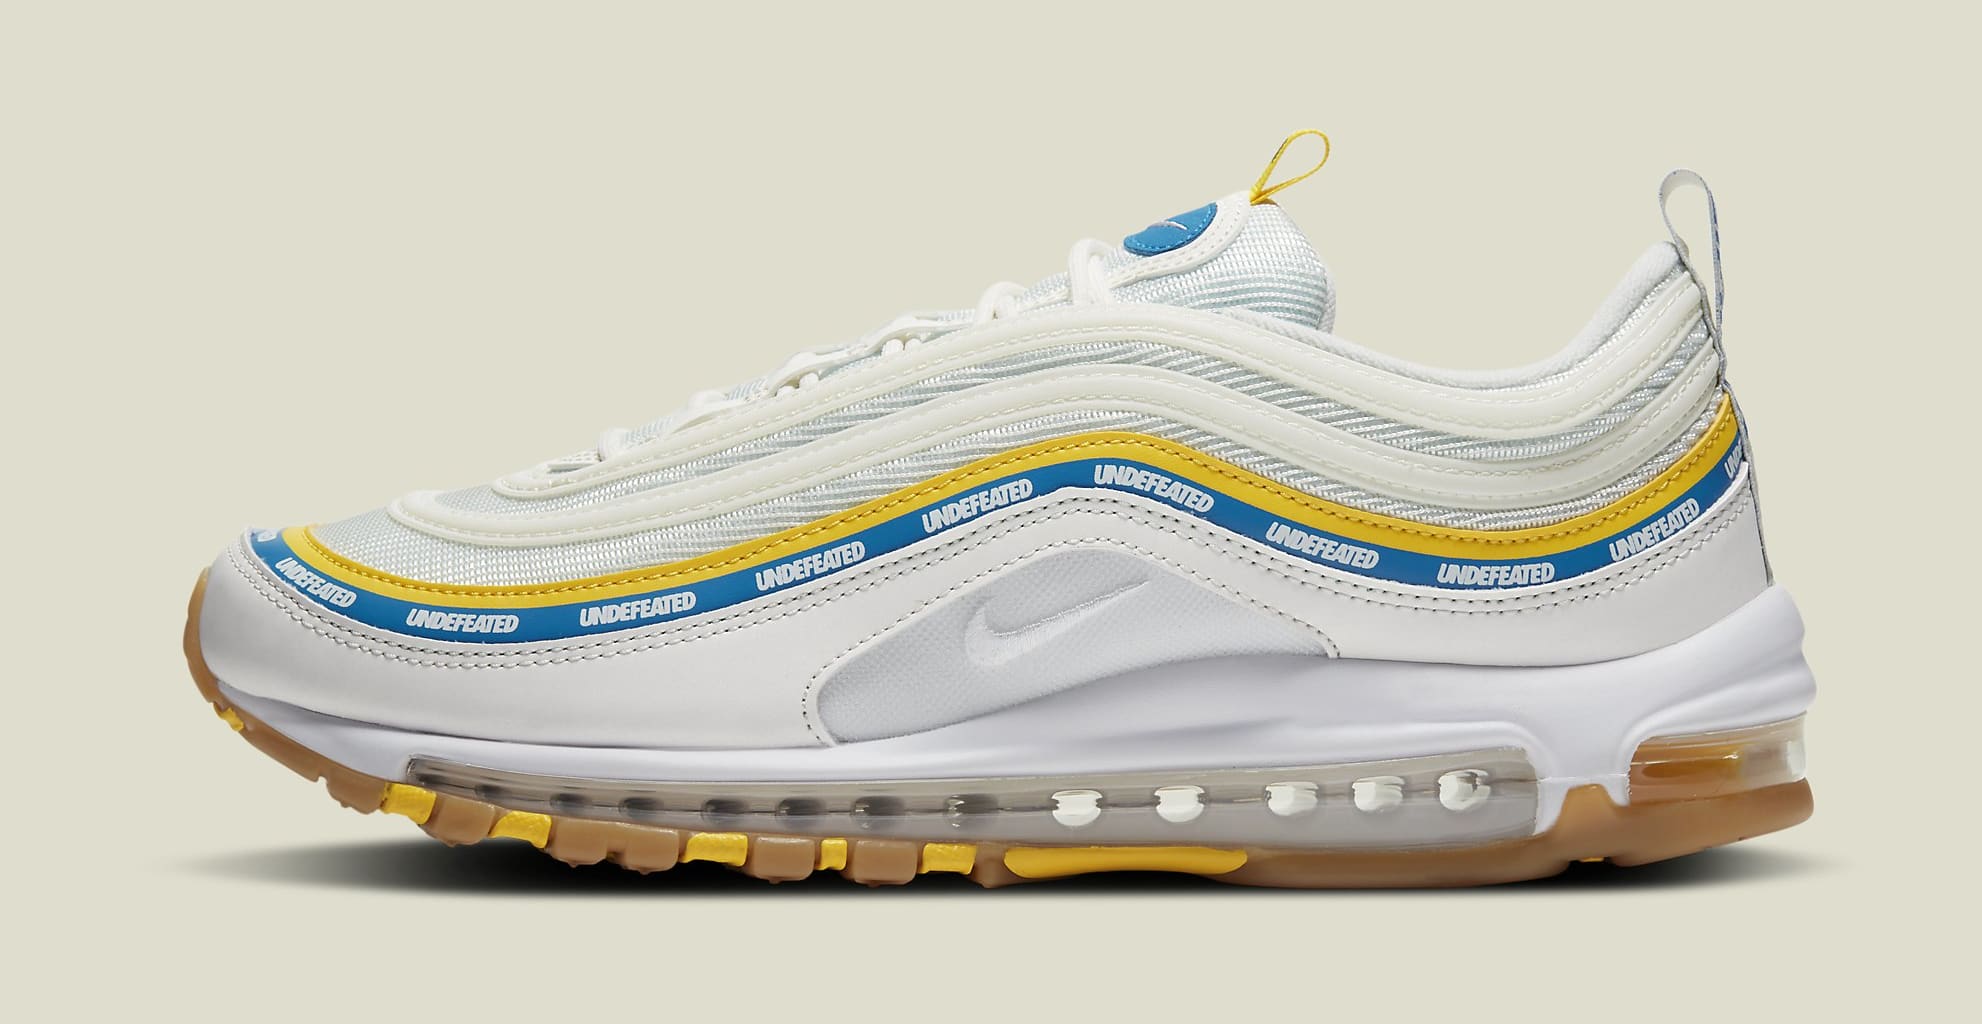 Undefeated x Nike Air Max 97 'Sail' DC4830-100 Lateral